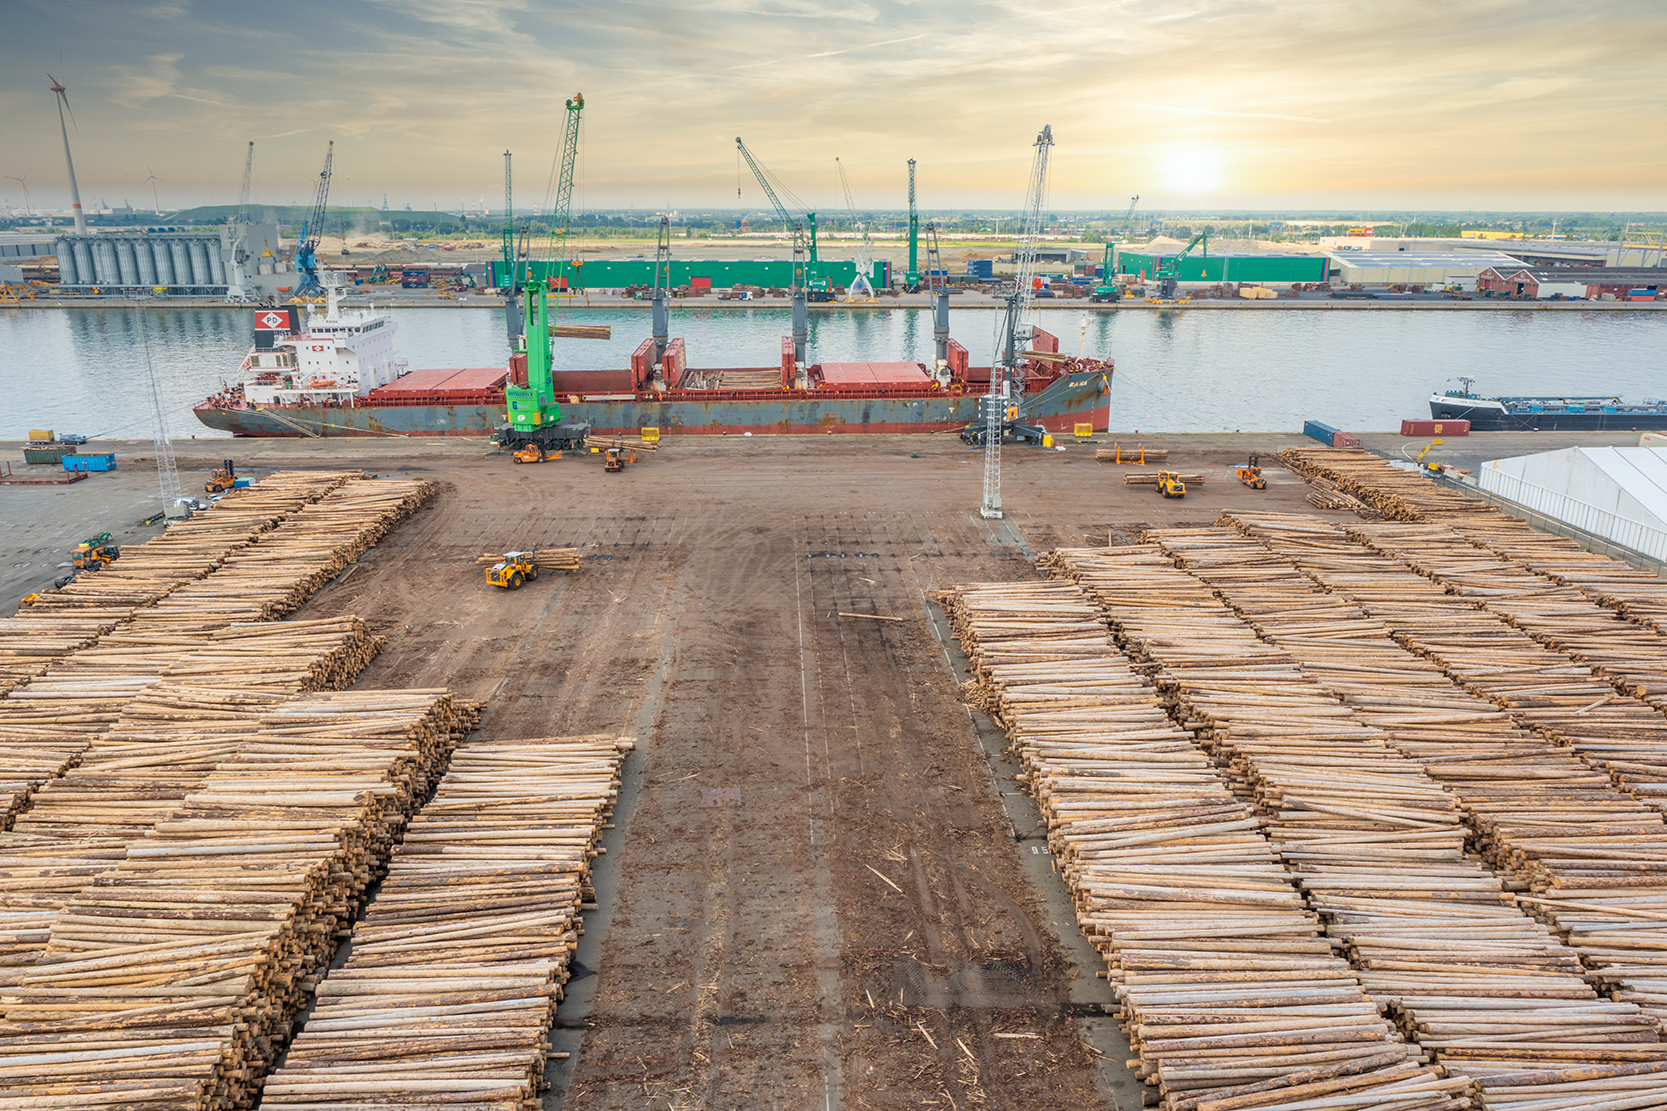 Unique log handling concept at the port of Antwerp (Video)